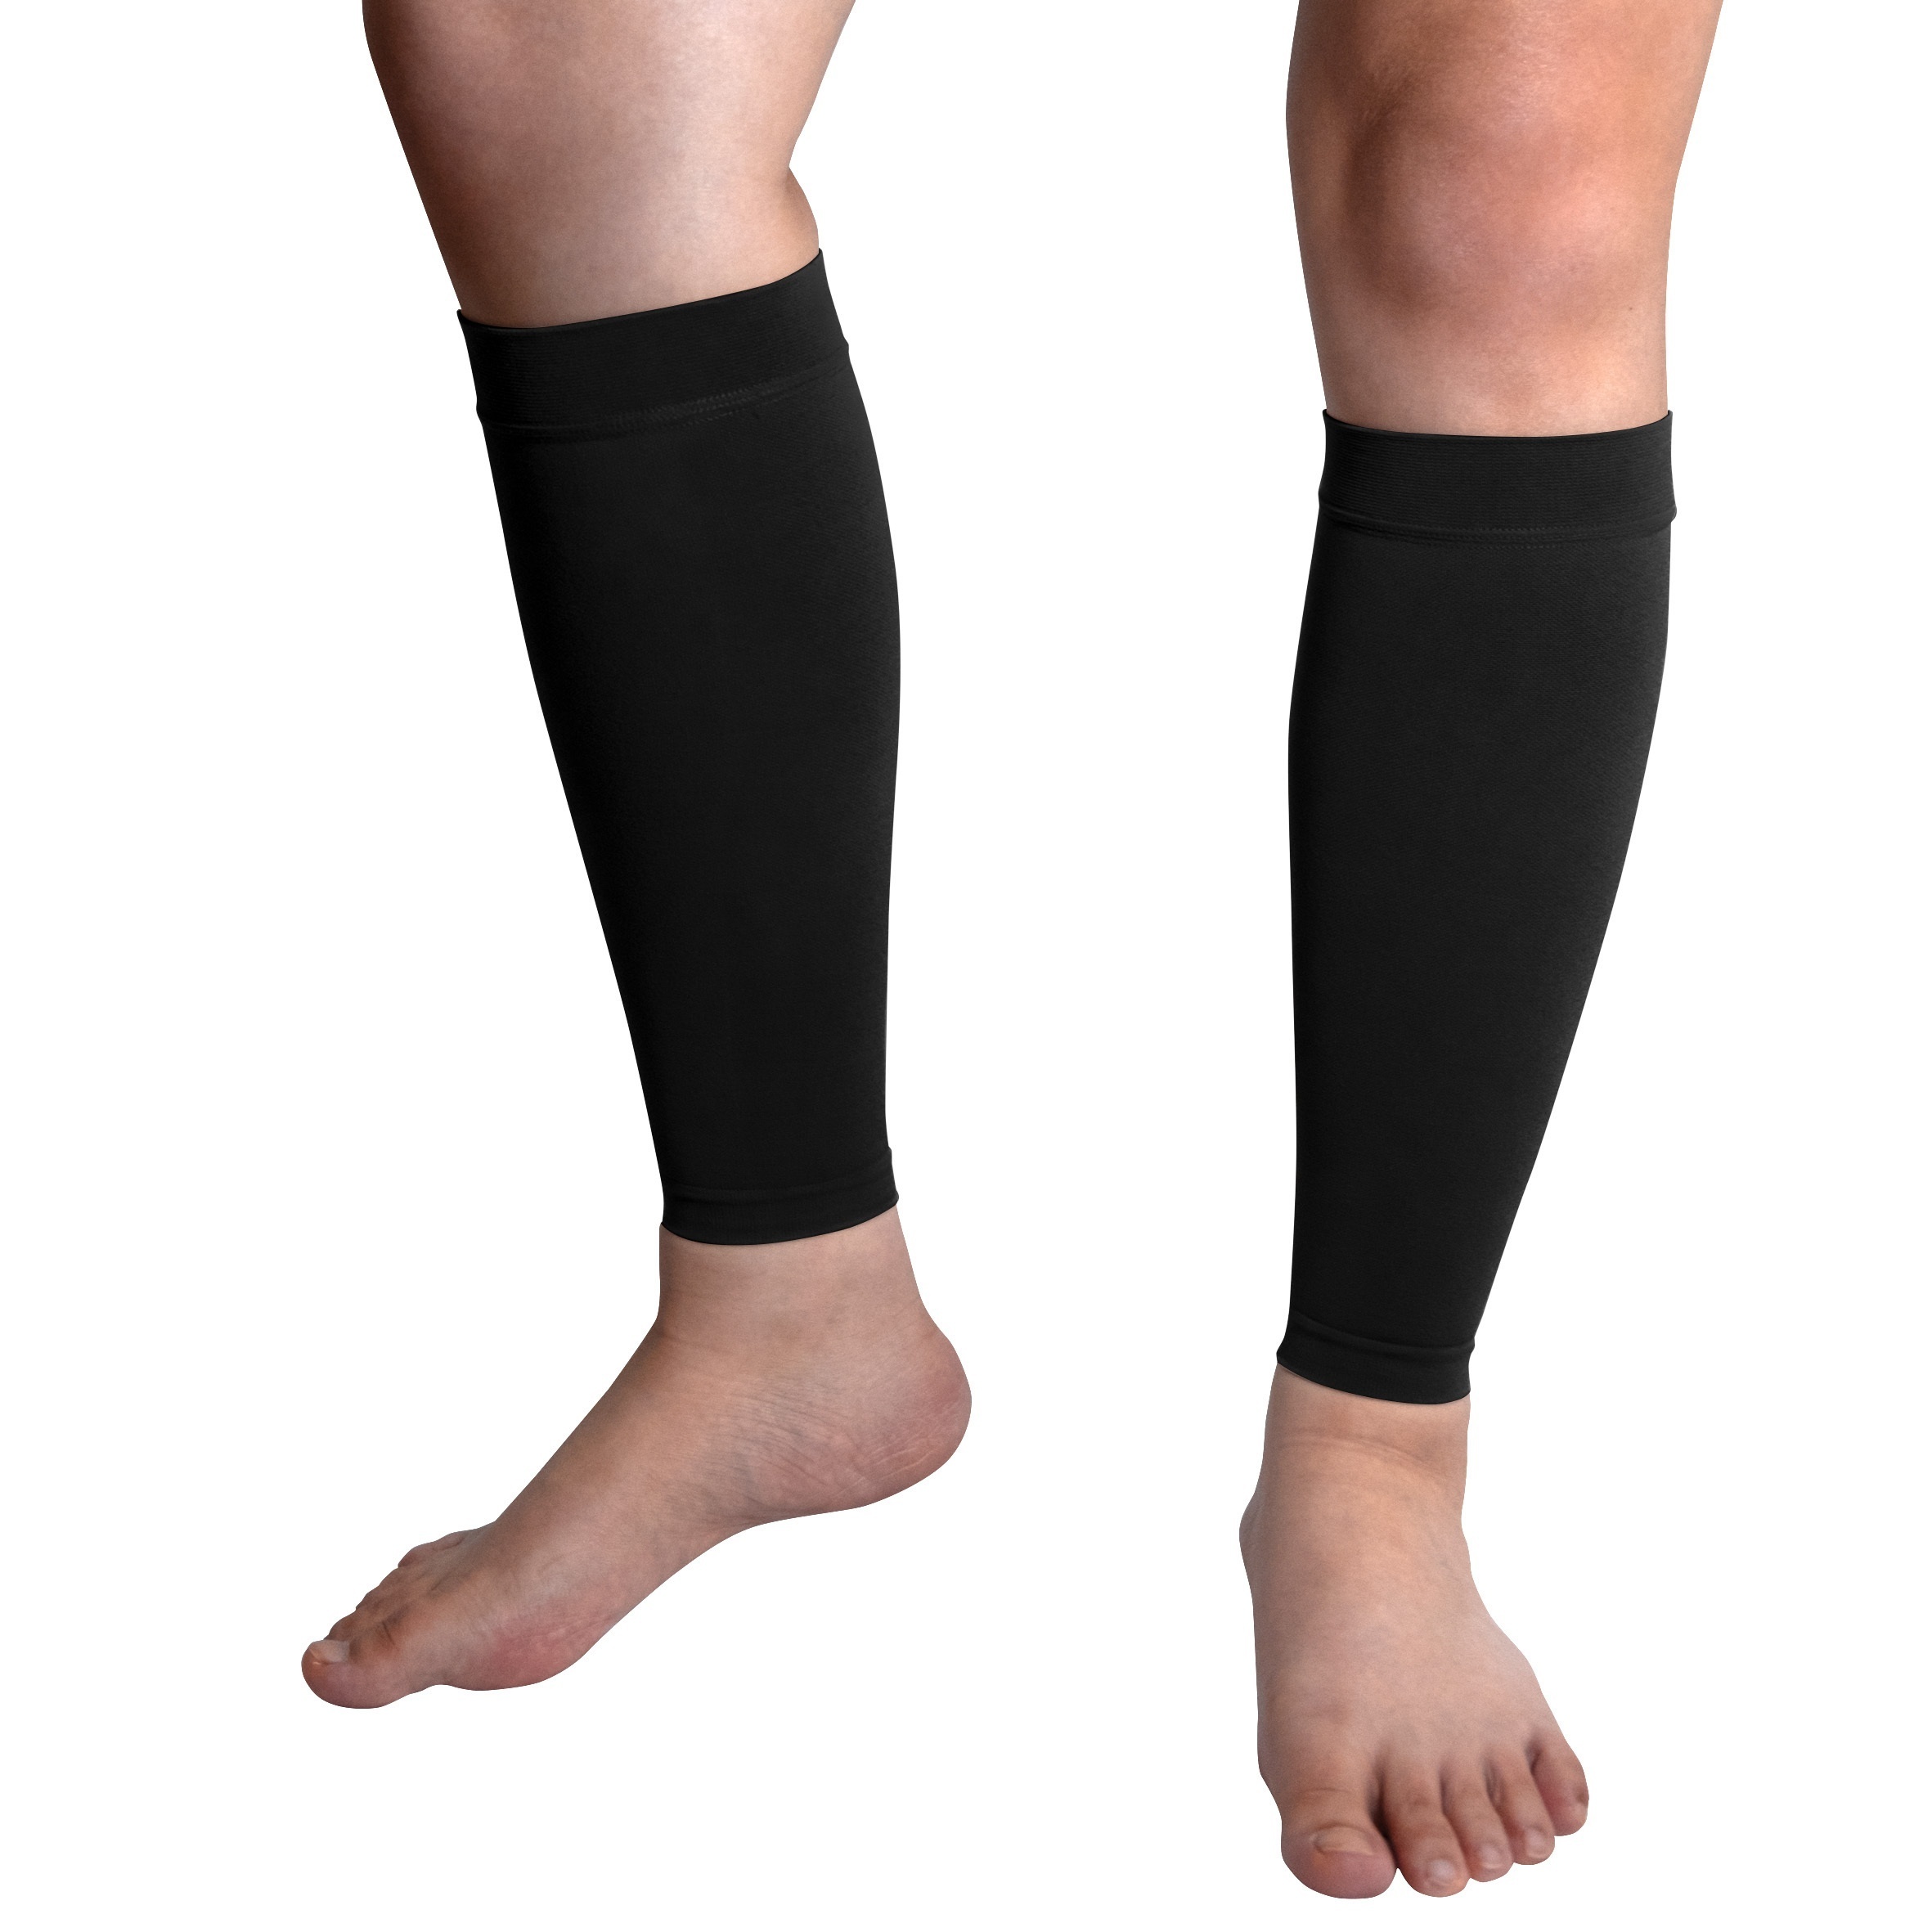 6 Pairs Leg Compression Sleeves Calf Compression Socks for Women Men  Footless Leg Support Brace for Running Cycling Shin Splint Swelling  Varicose Veins Pain Relief (Black and Beige,Small/Medium) Black and Beige  Small/